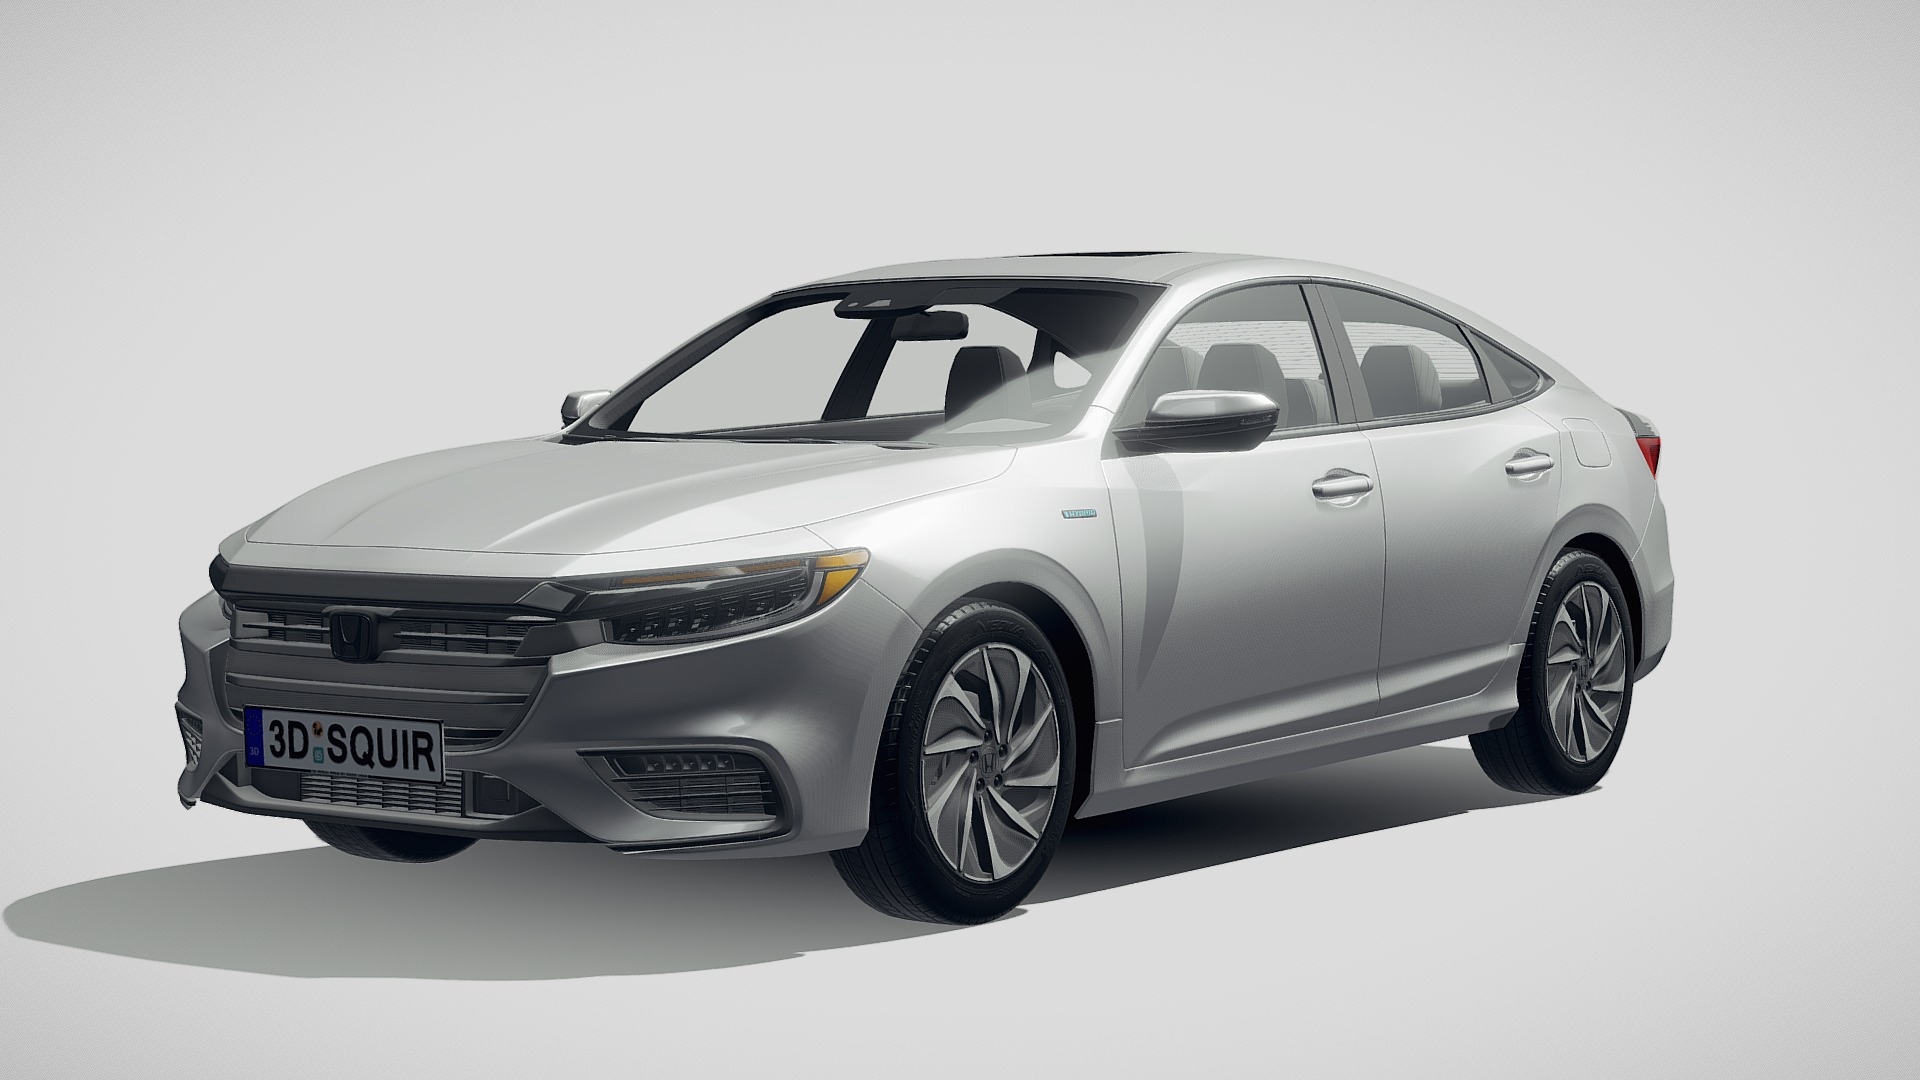 3D model Honda Insight 2019 - This is a 3D model of the Honda Insight 2019. The 3D model is about a silver car with a white background with Holden Arboretum in the background.